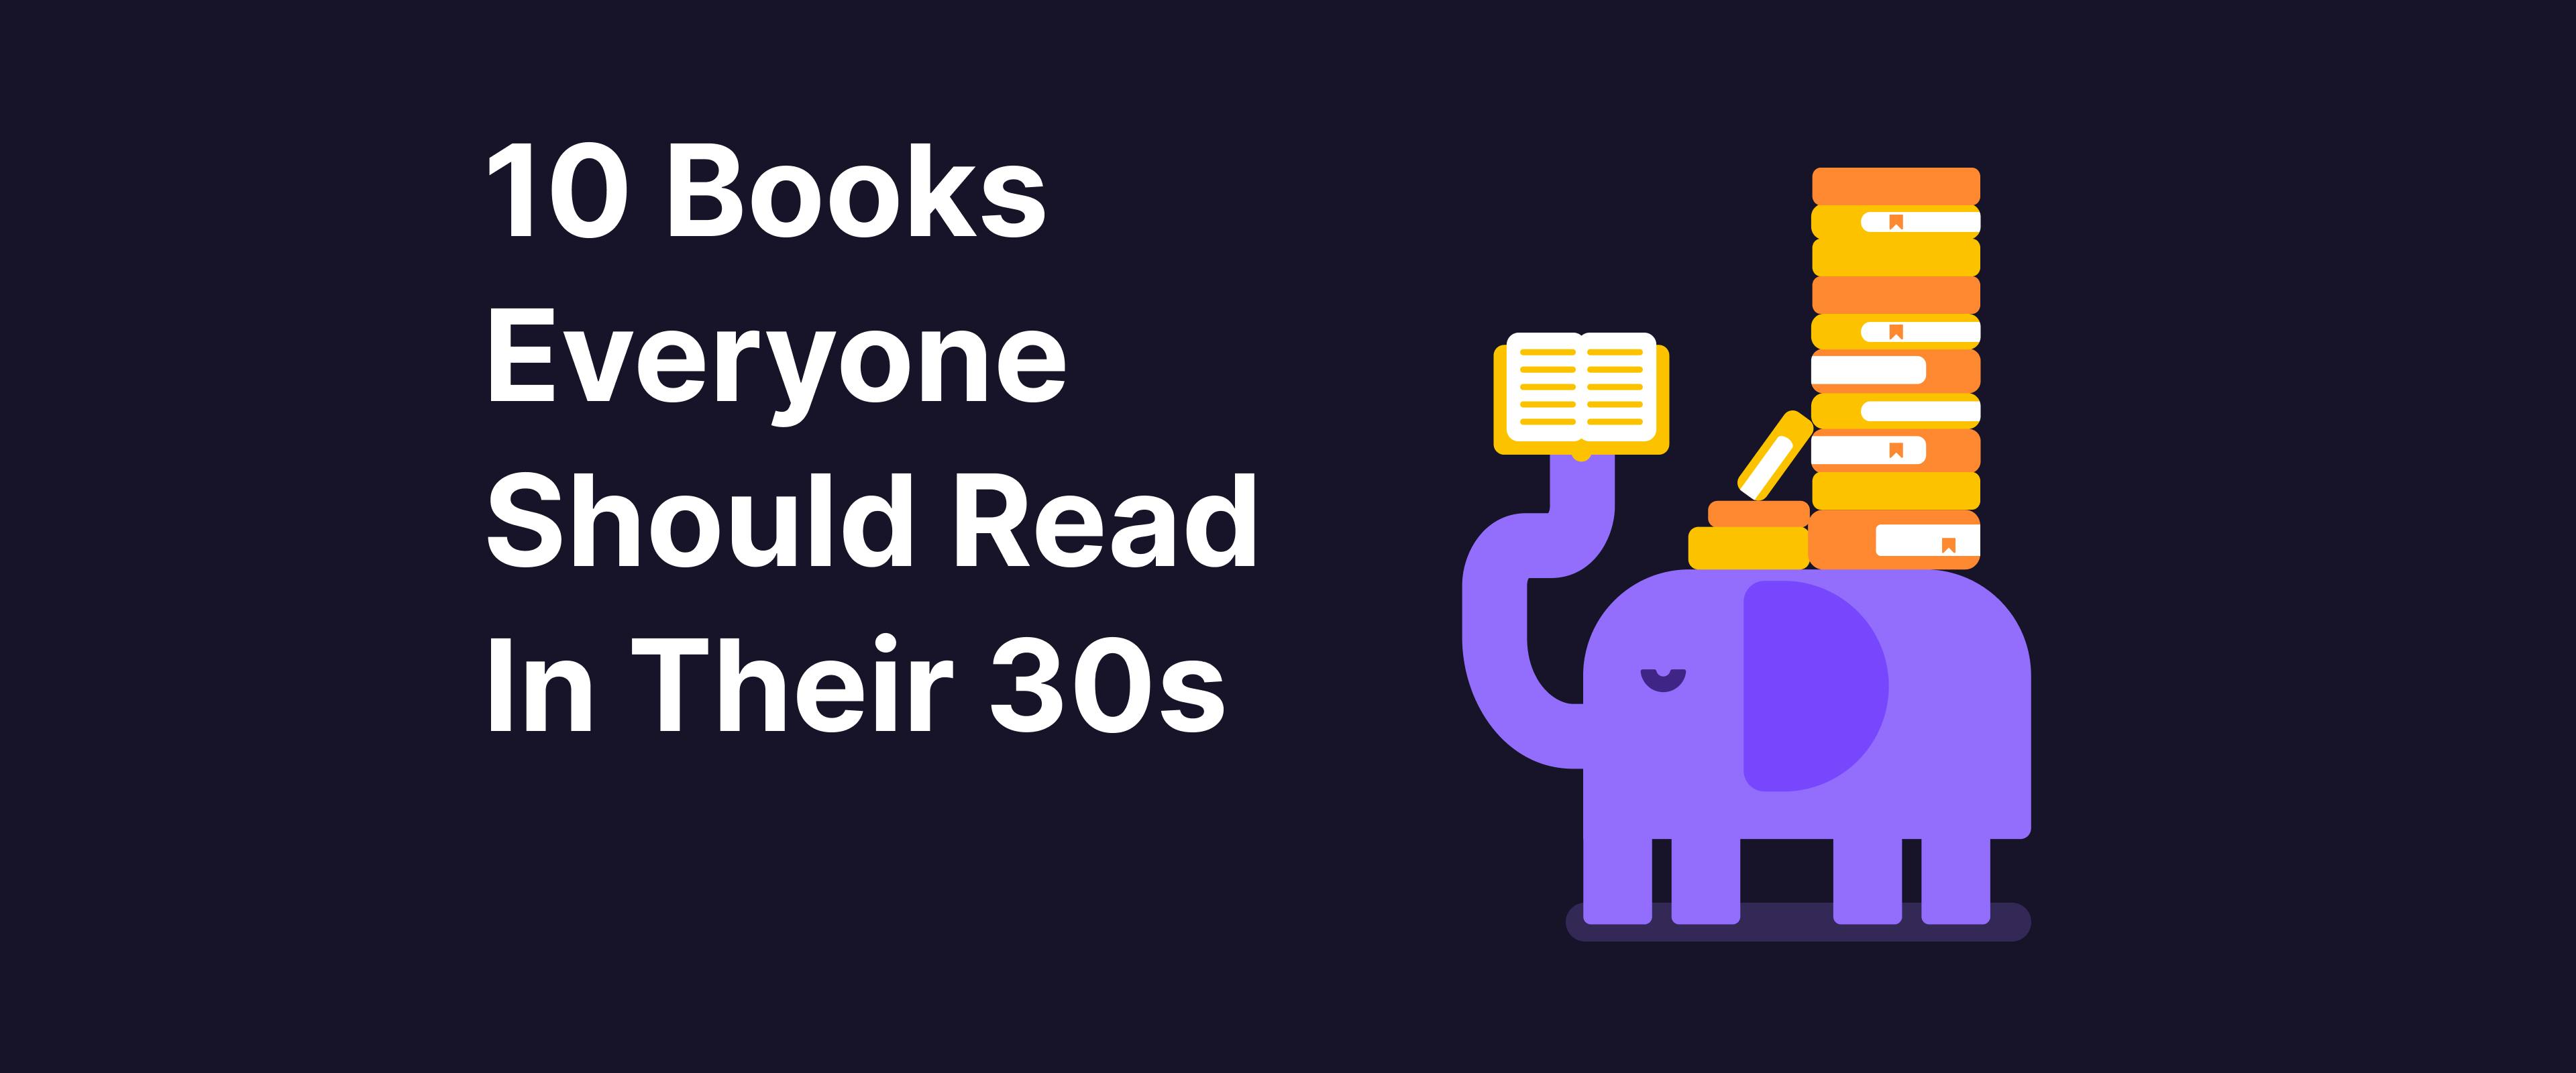 10 Books Everyone Should Read In Their 30s -  Headway